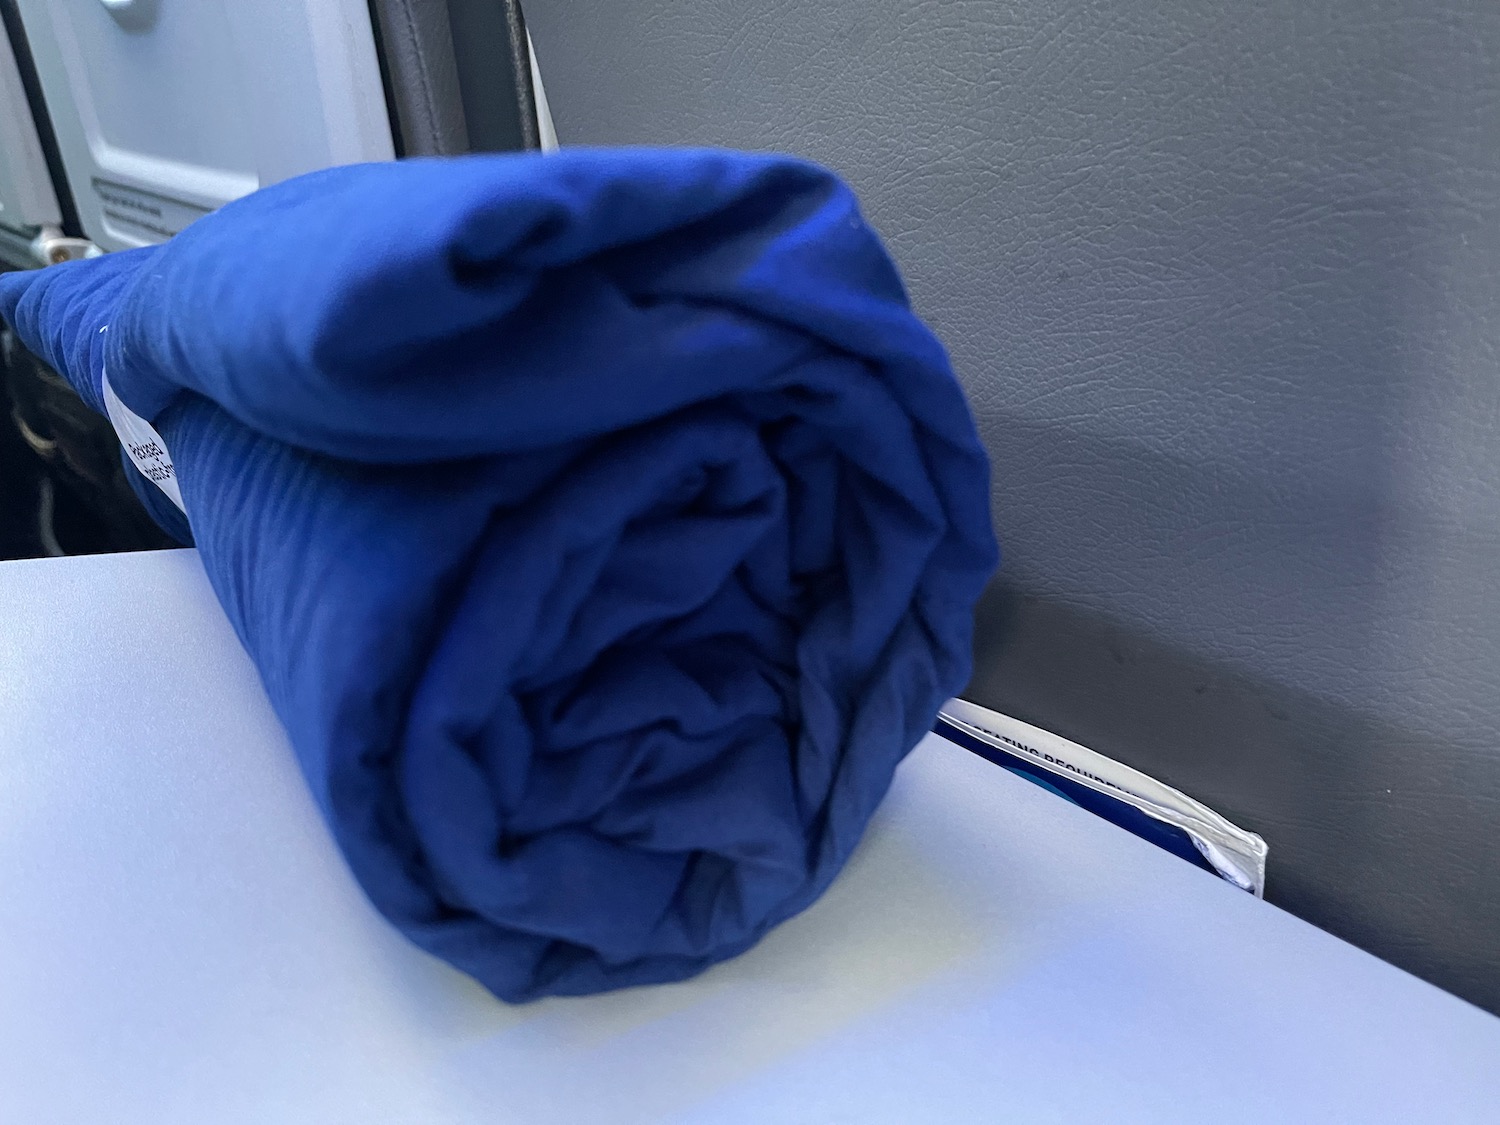 a blue blanket rolled up on a white surface